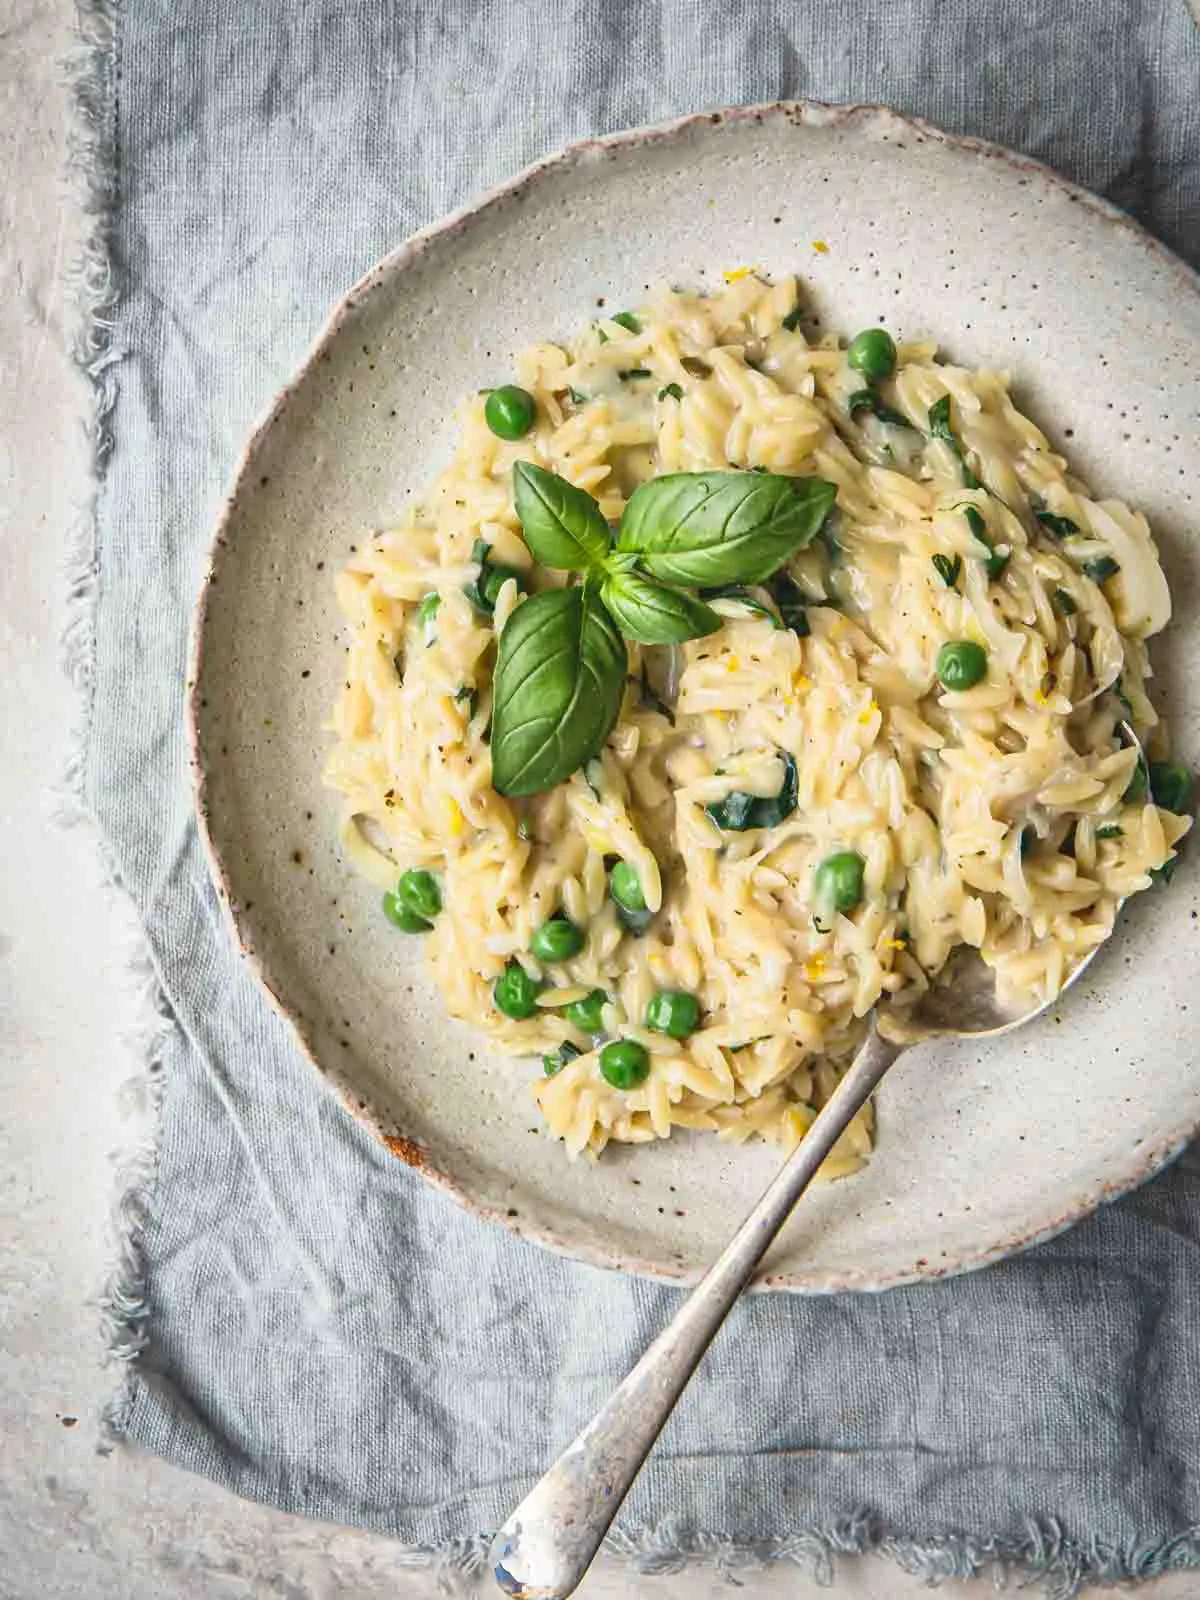 Lemon orzo in a bowl with basil.